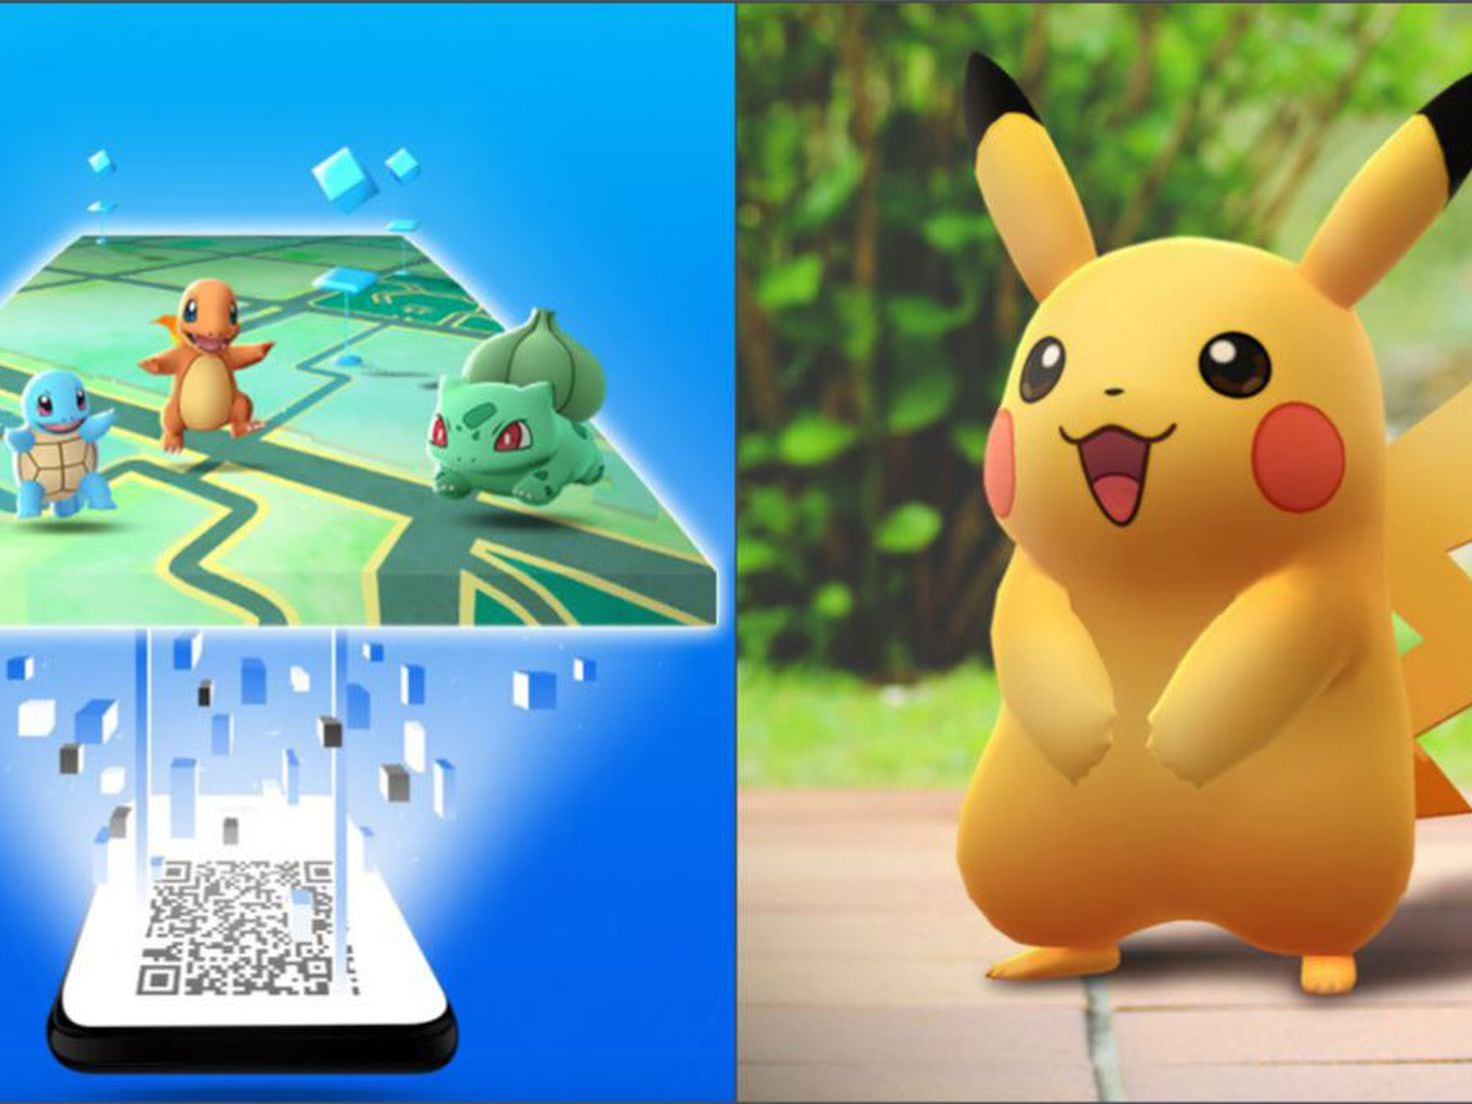 Pokémon GO gets free items with Prime Gaming; how to redeem - Meristation